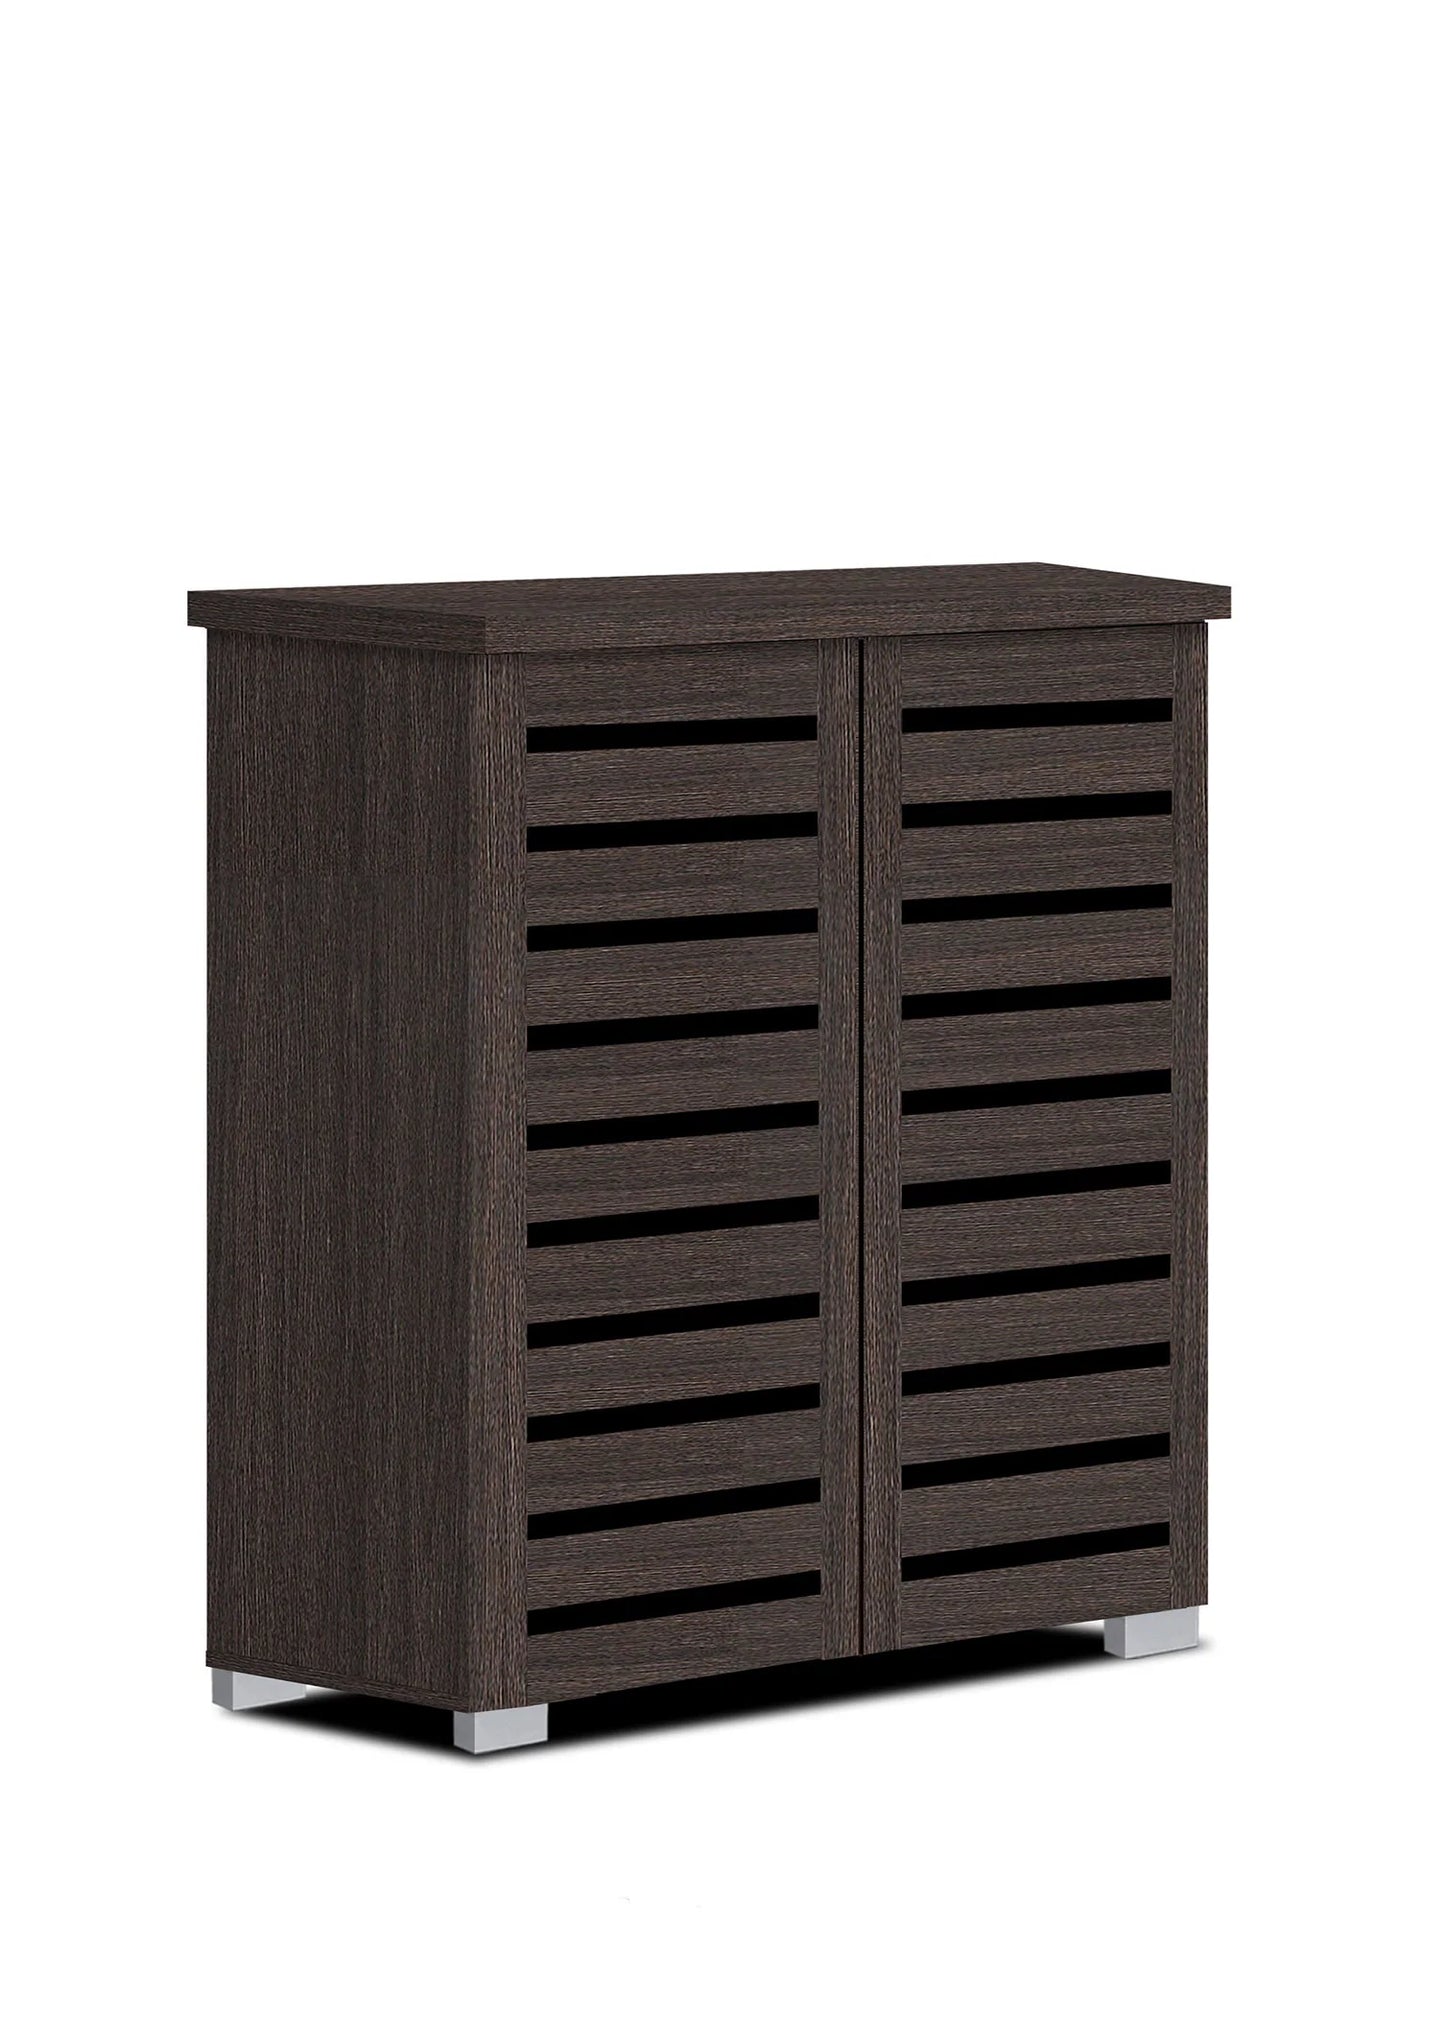 Shoe Cabinet 4 Shelves Comes in Espresso or Natural Finish